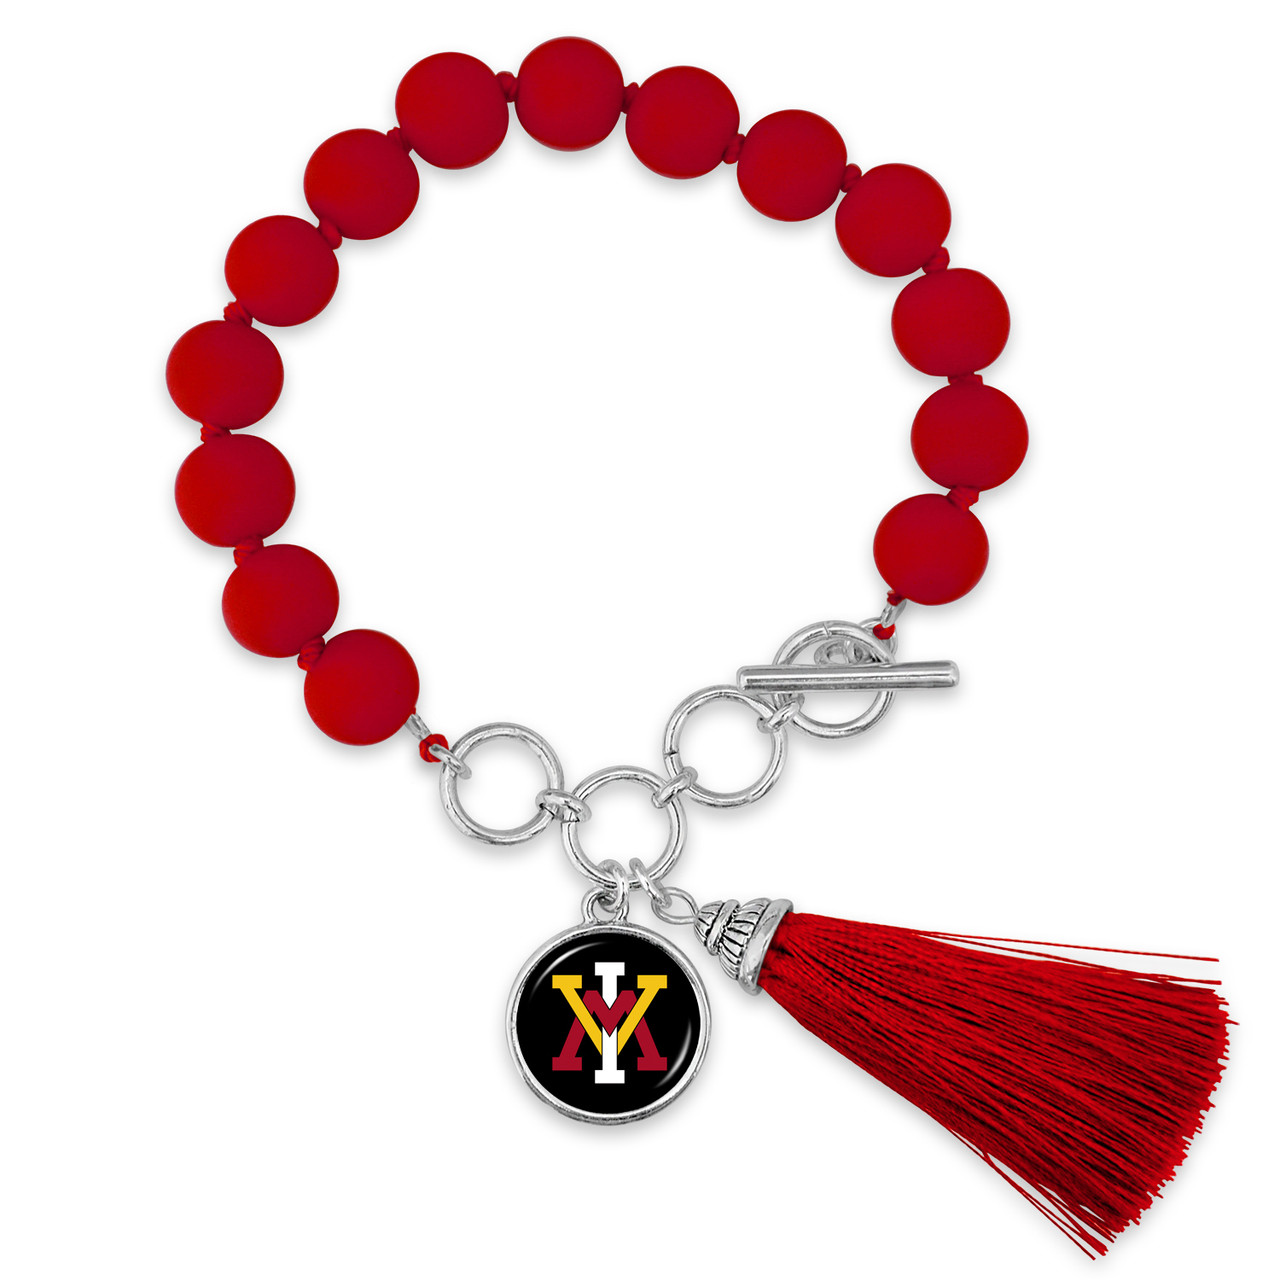 Virginia Military Keydets Bracelet- No Strings Attached